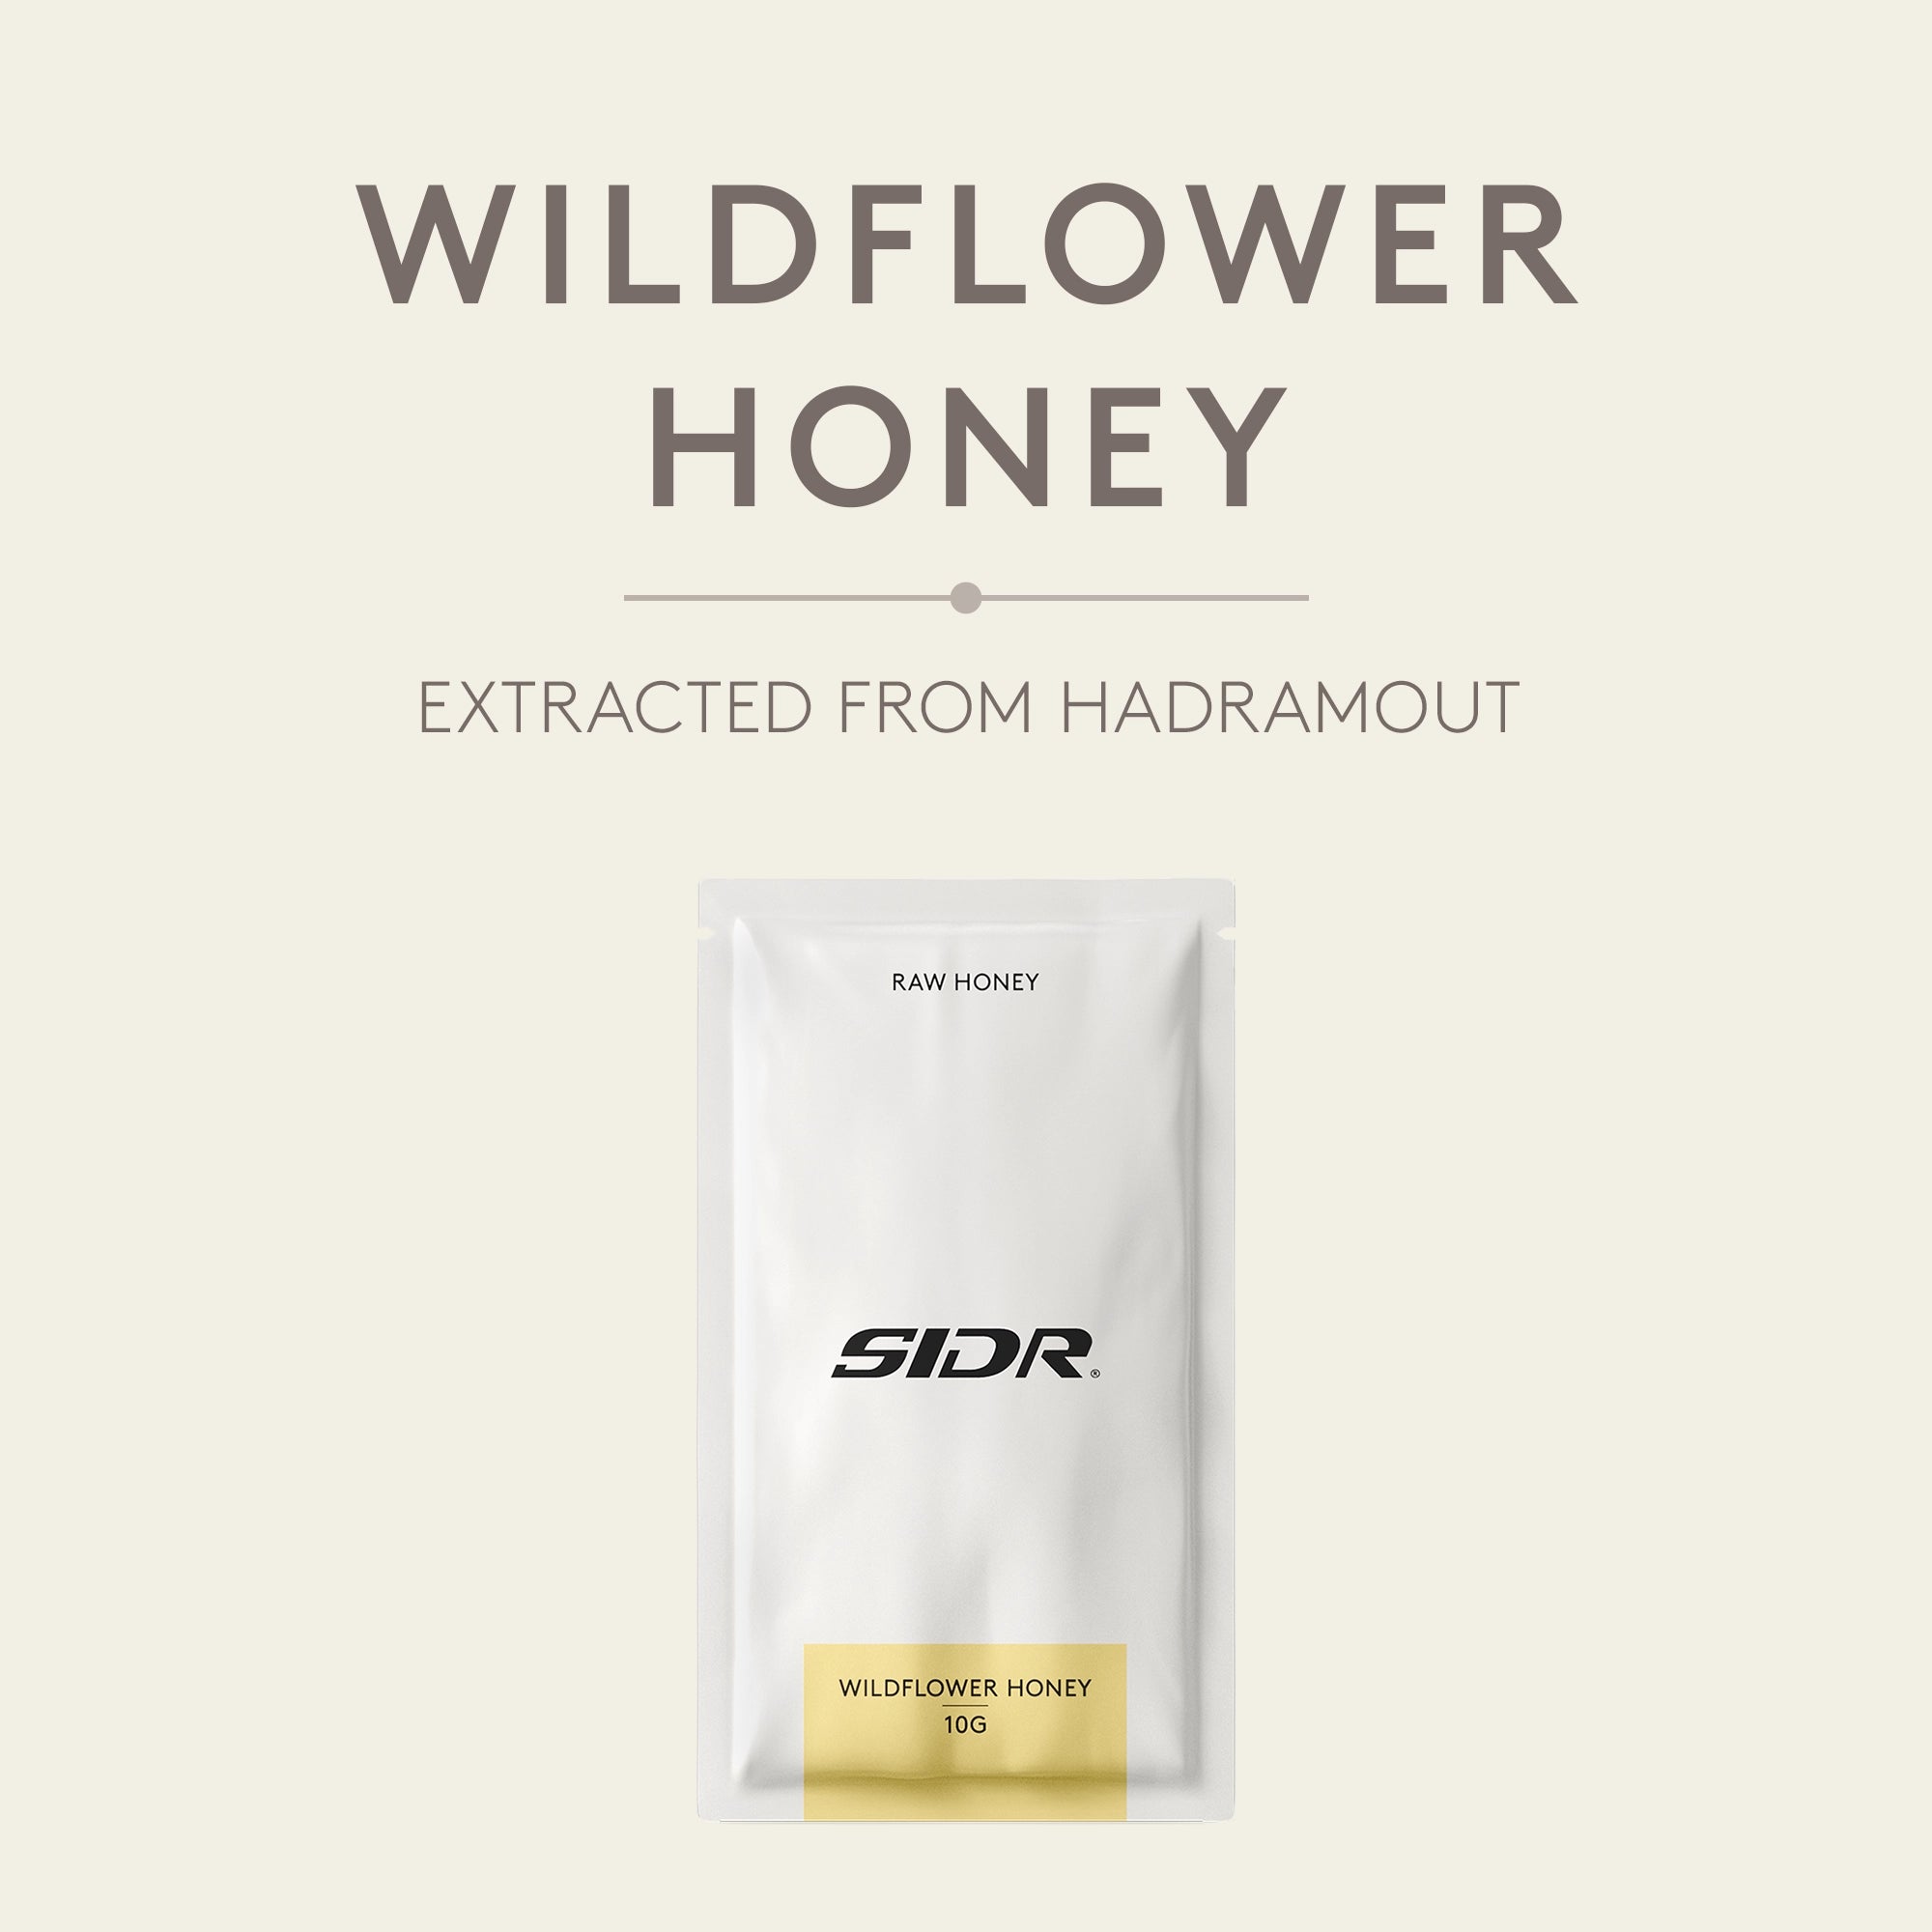 wildflower honey packet from hadramout